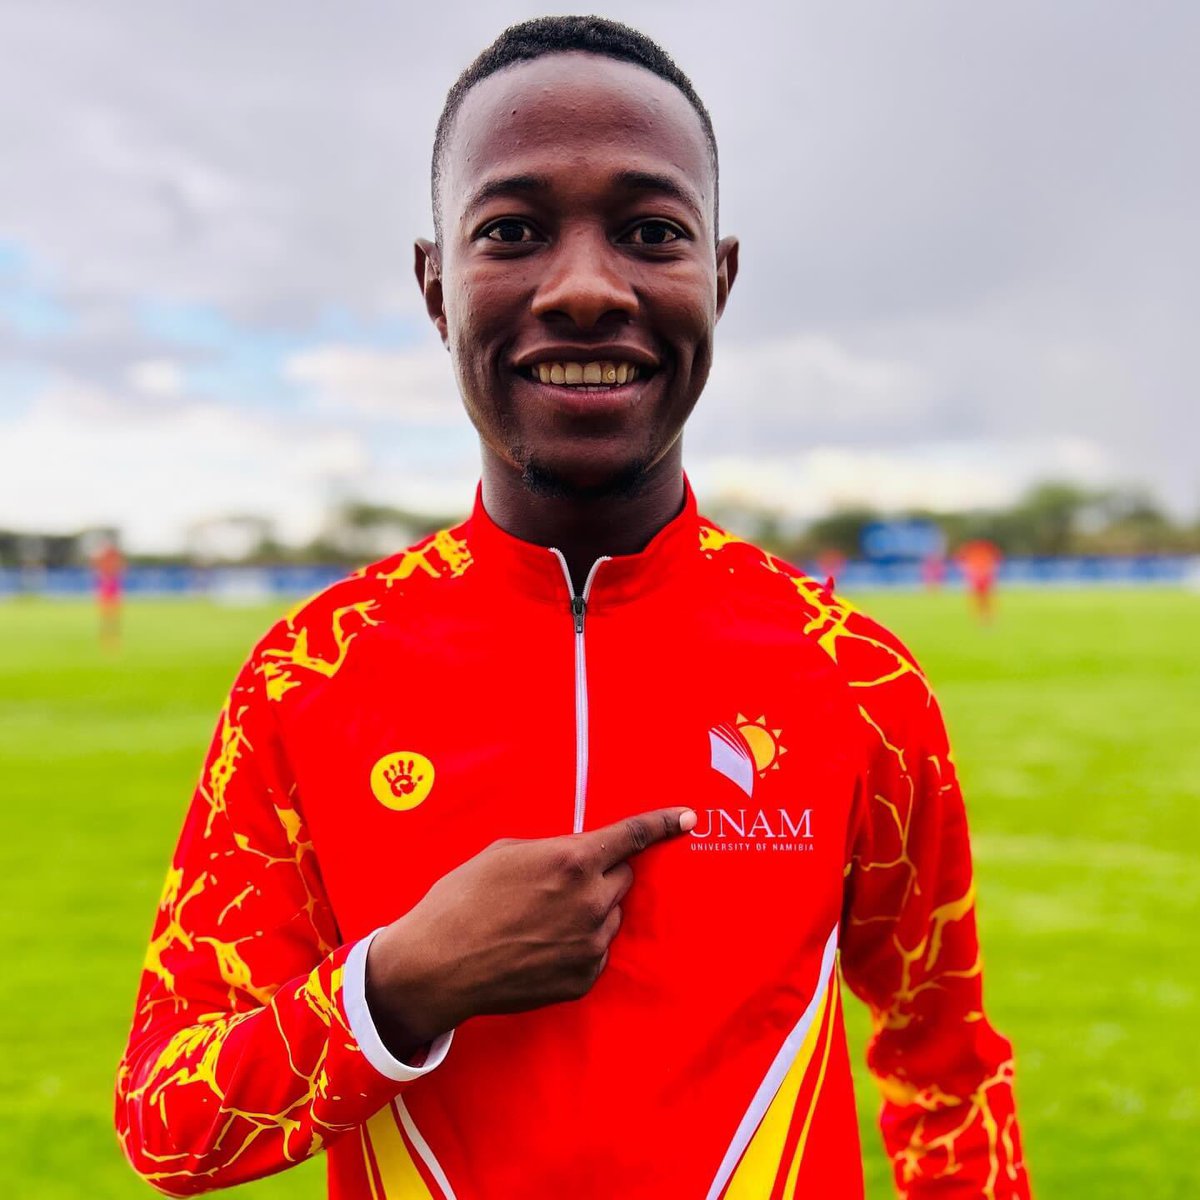 𝗗𝗢𝗡𝗘 𝗗𝗘𝗔𝗟🚨✍️

UNAM FC has signed Isado Jagger from Civics FC. 

The attacker began his football career with TST Gariseb Orlando FC in Khorixas. He has previously played for Outjo Football Academy, Robbers Chatties FC in the Kunene Second Division, and Black Africa FC.